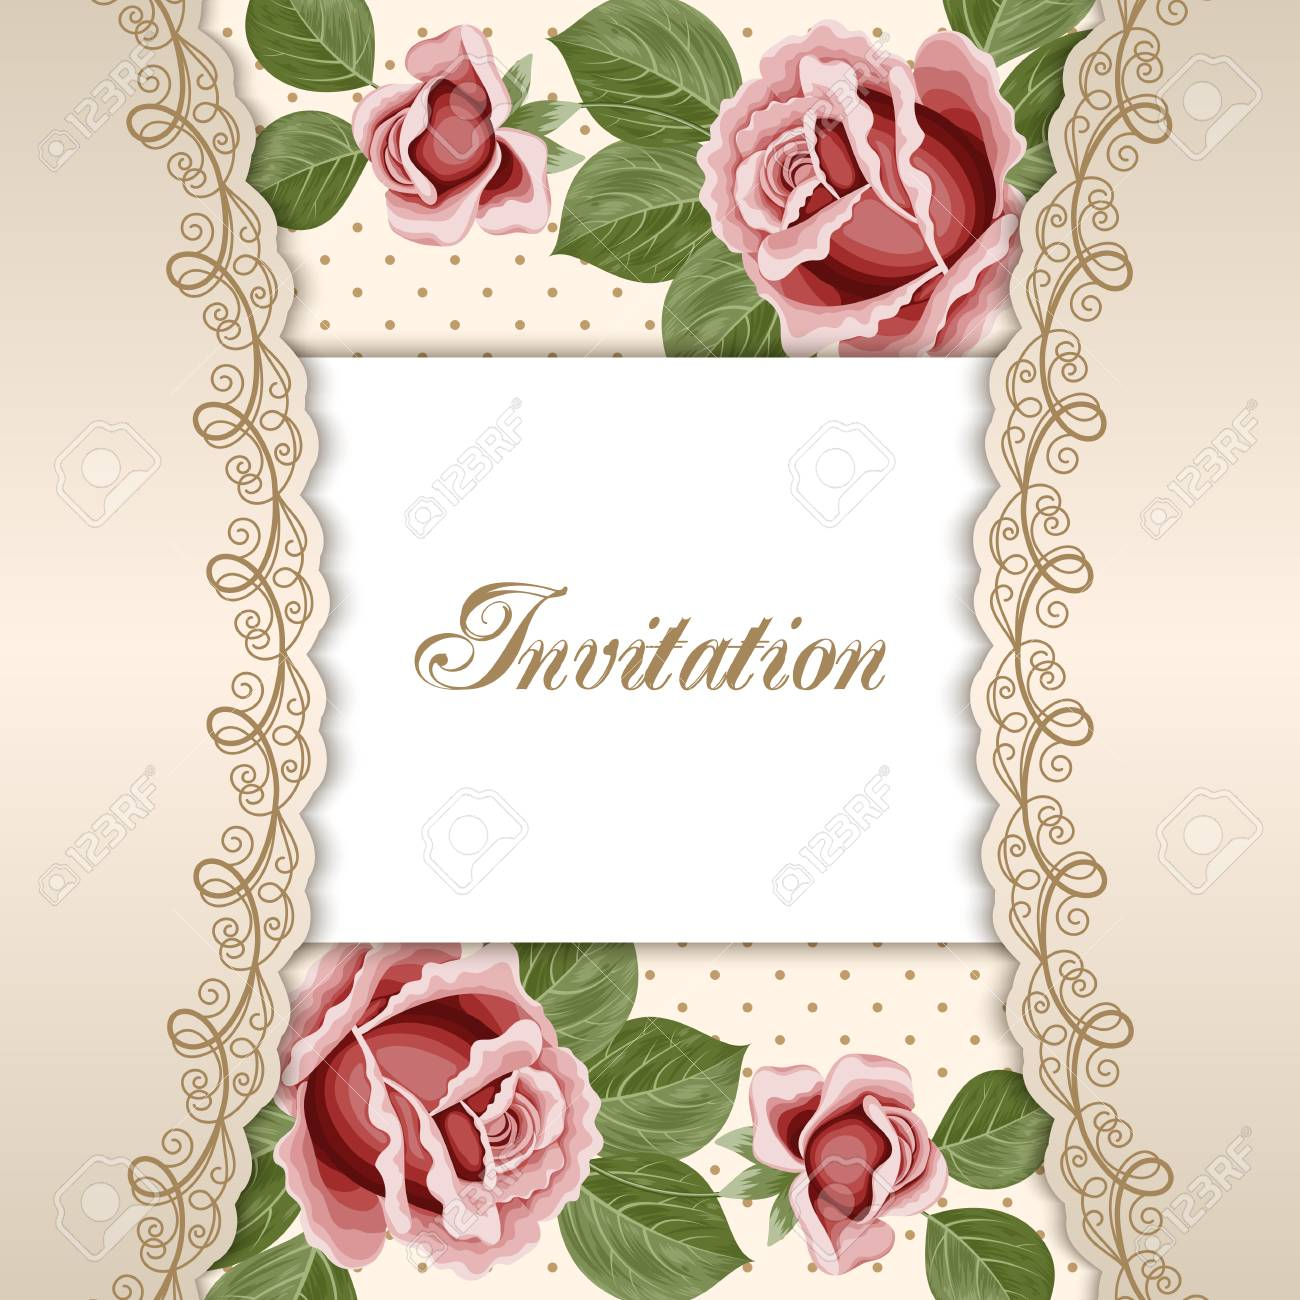 Vintage Floral Invitation Template With Hand Drawn Flowers Royalty intended for proportions 1300 X 1300